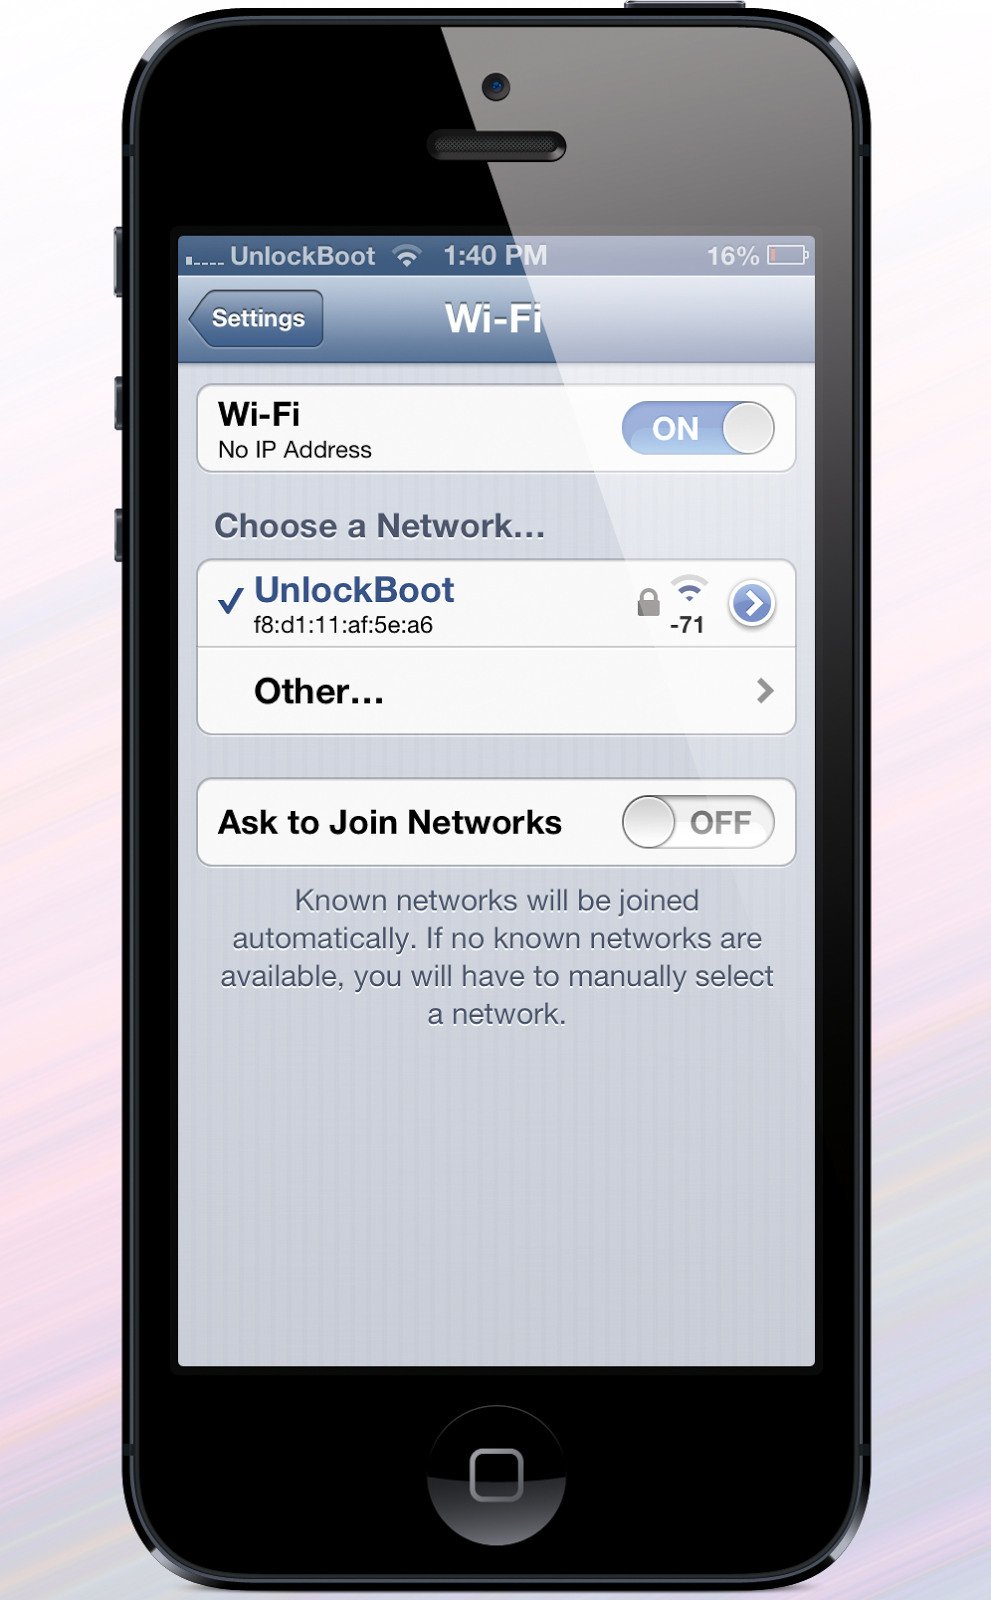 comment augmenter wifi iphone